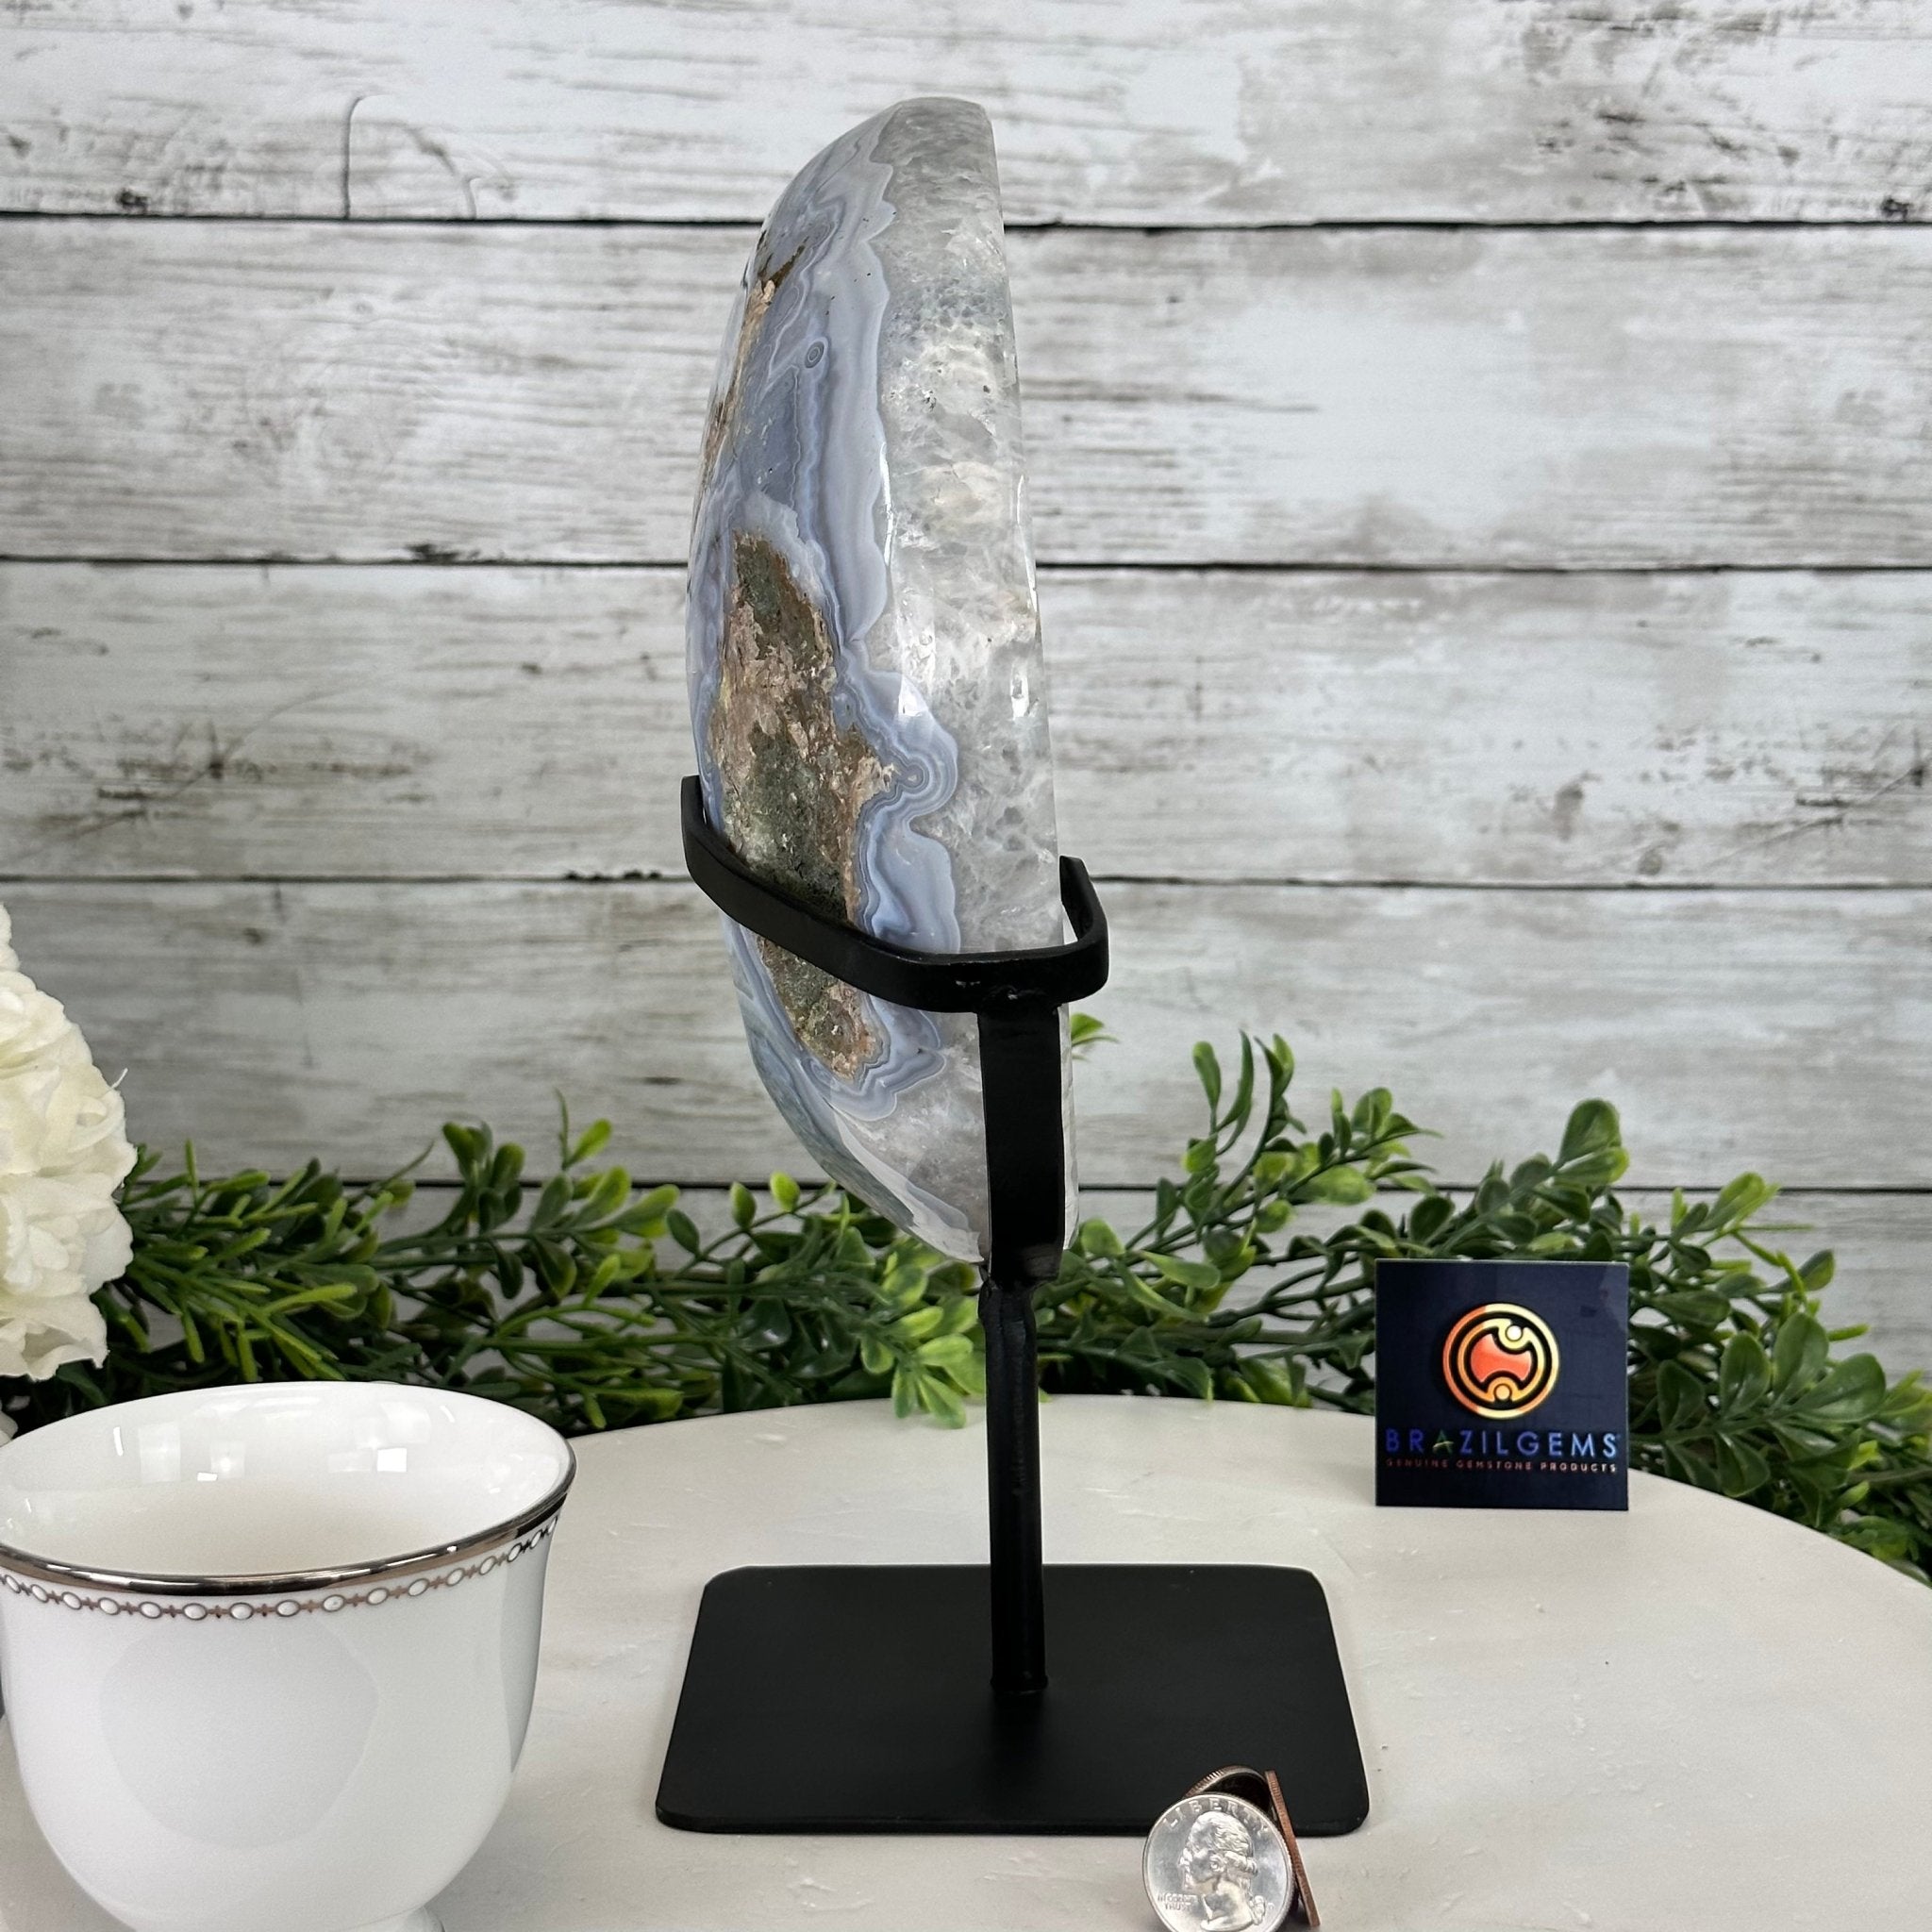 Polished Agate Crescent Moon on a Stand, 6.3 lbs & 11" Tall #5740NA-011 by Brazil Gems - Brazil GemsBrazil GemsPolished Agate Crescent Moon on a Stand, 6.3 lbs & 11" Tall #5740NA-011 by Brazil GemsCrescent Moons5740NA-011